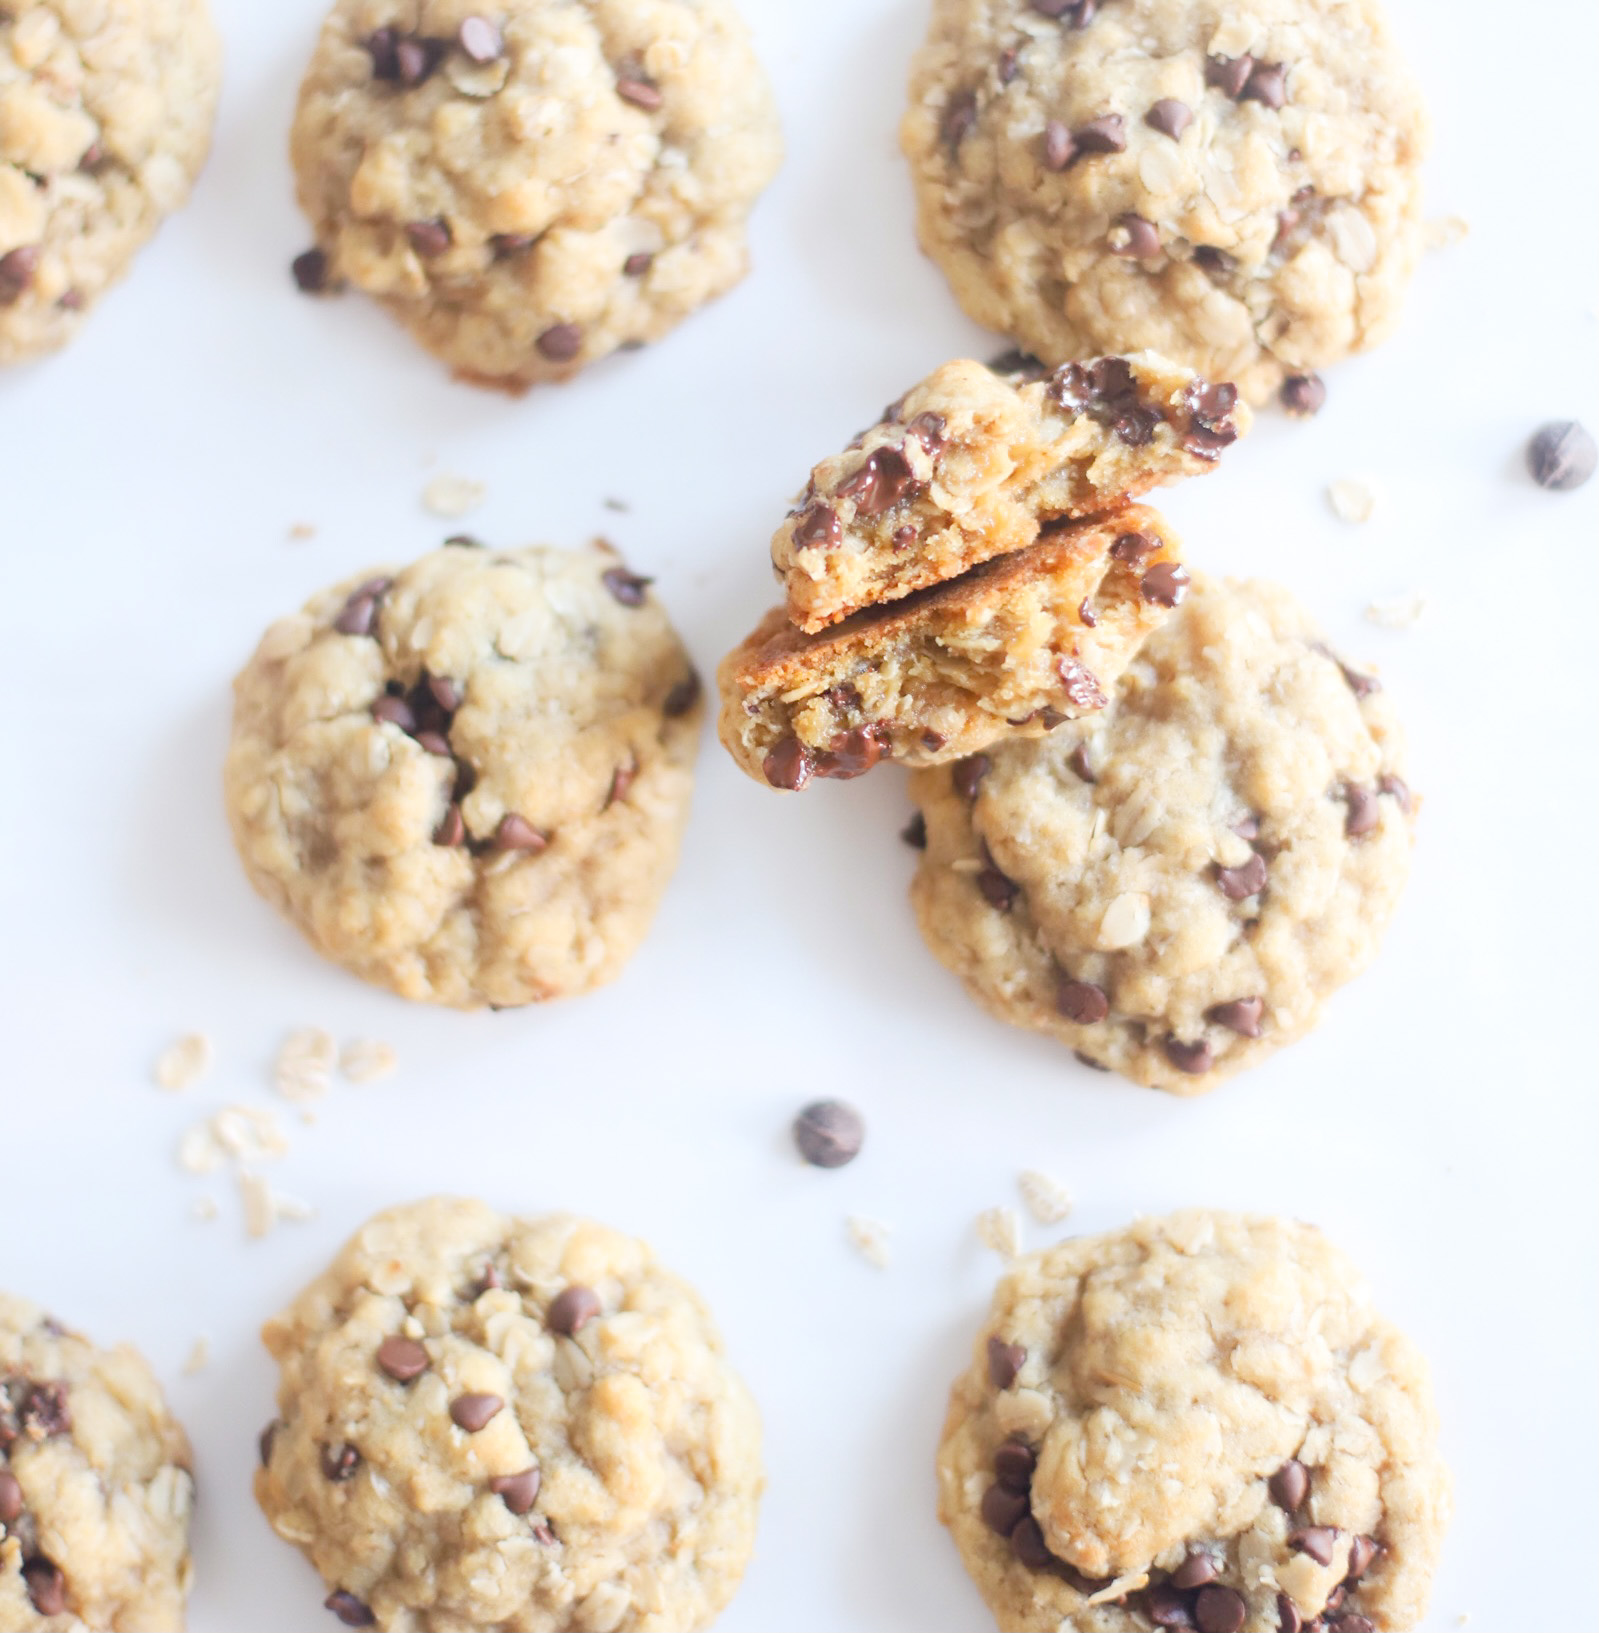 Hands down our very favorite oatmeal chocolate chip cookies, these heavenly oatmeal cookies are moist in the center, crisp and chewy on the outside, and totally delicious. They’re also super easy to make all in one bowl, and can easily be made dairy-free, vegan, or gluten-free! | @glitterinclexi | GLITTERINC.COM